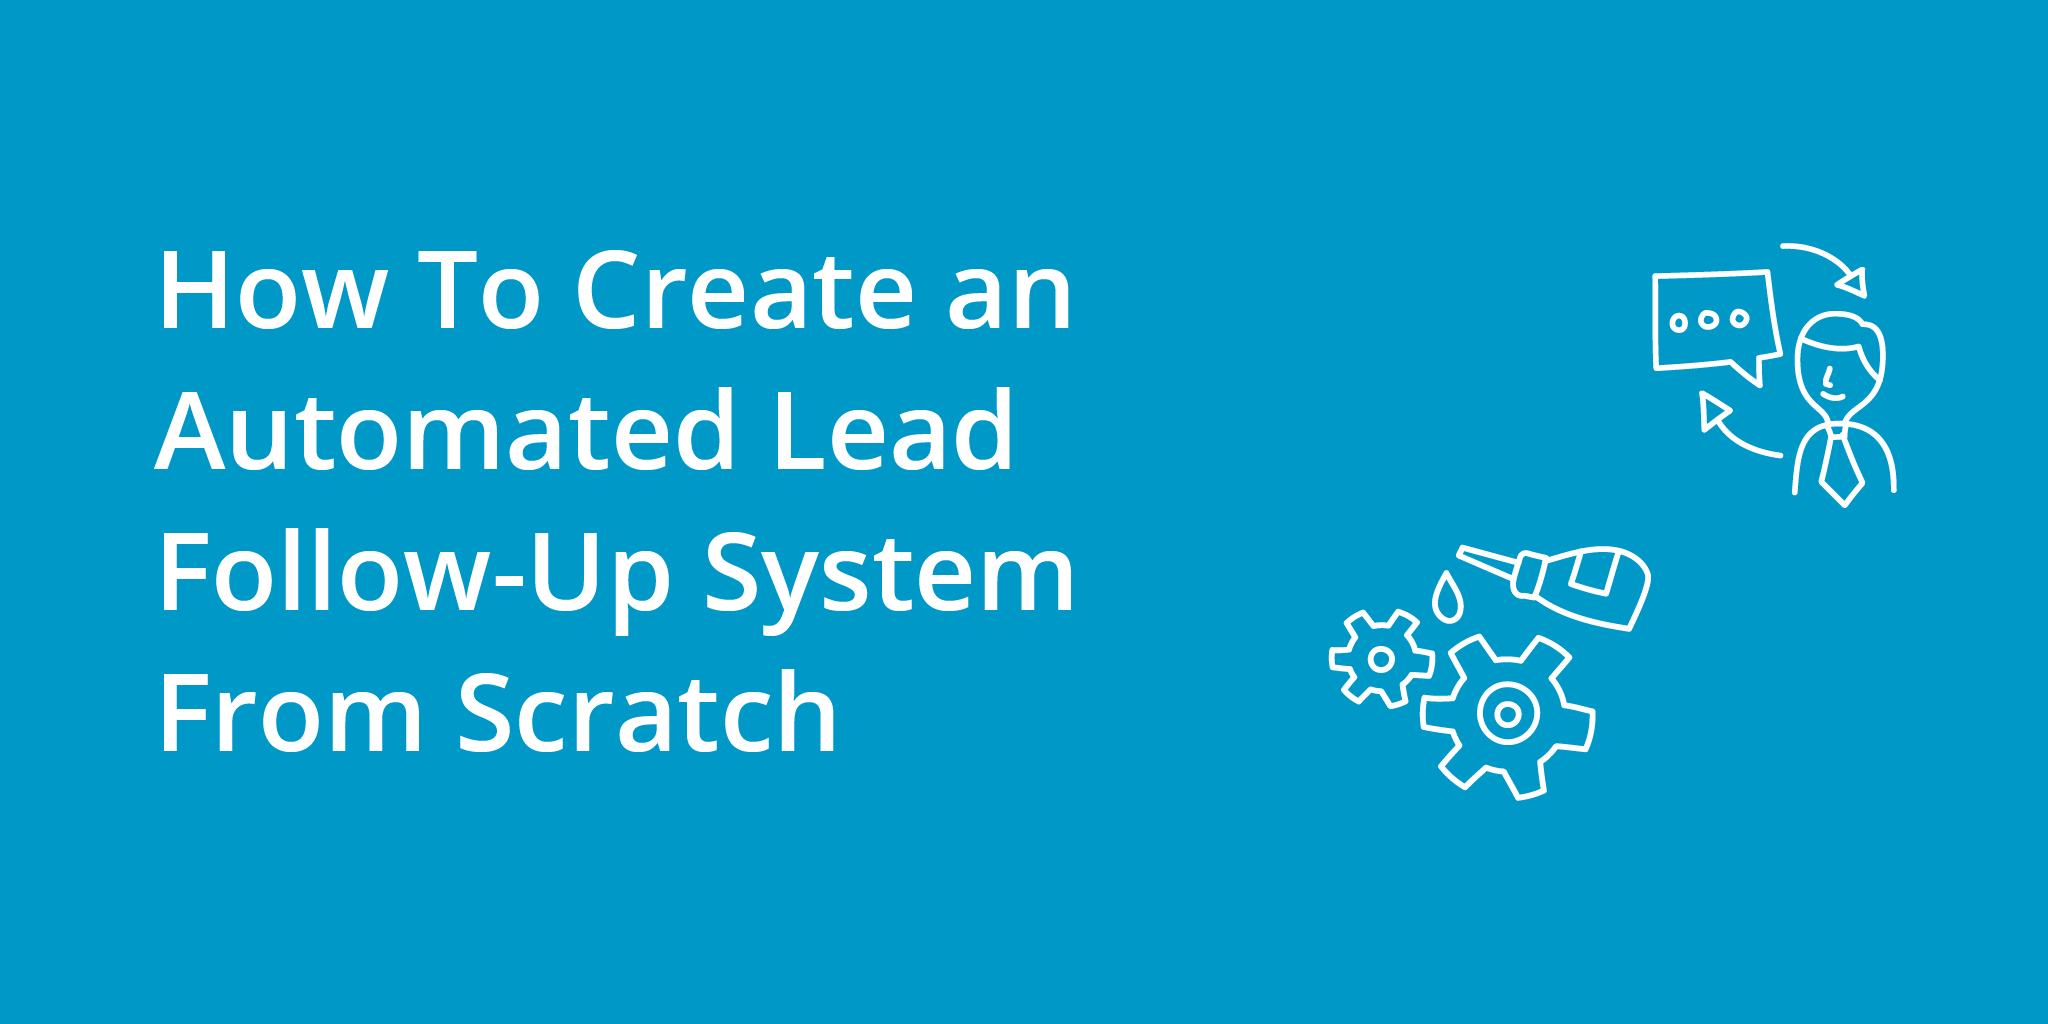 How To Create An Automated Lead Follow-Up System From Scratch | Telephones for business